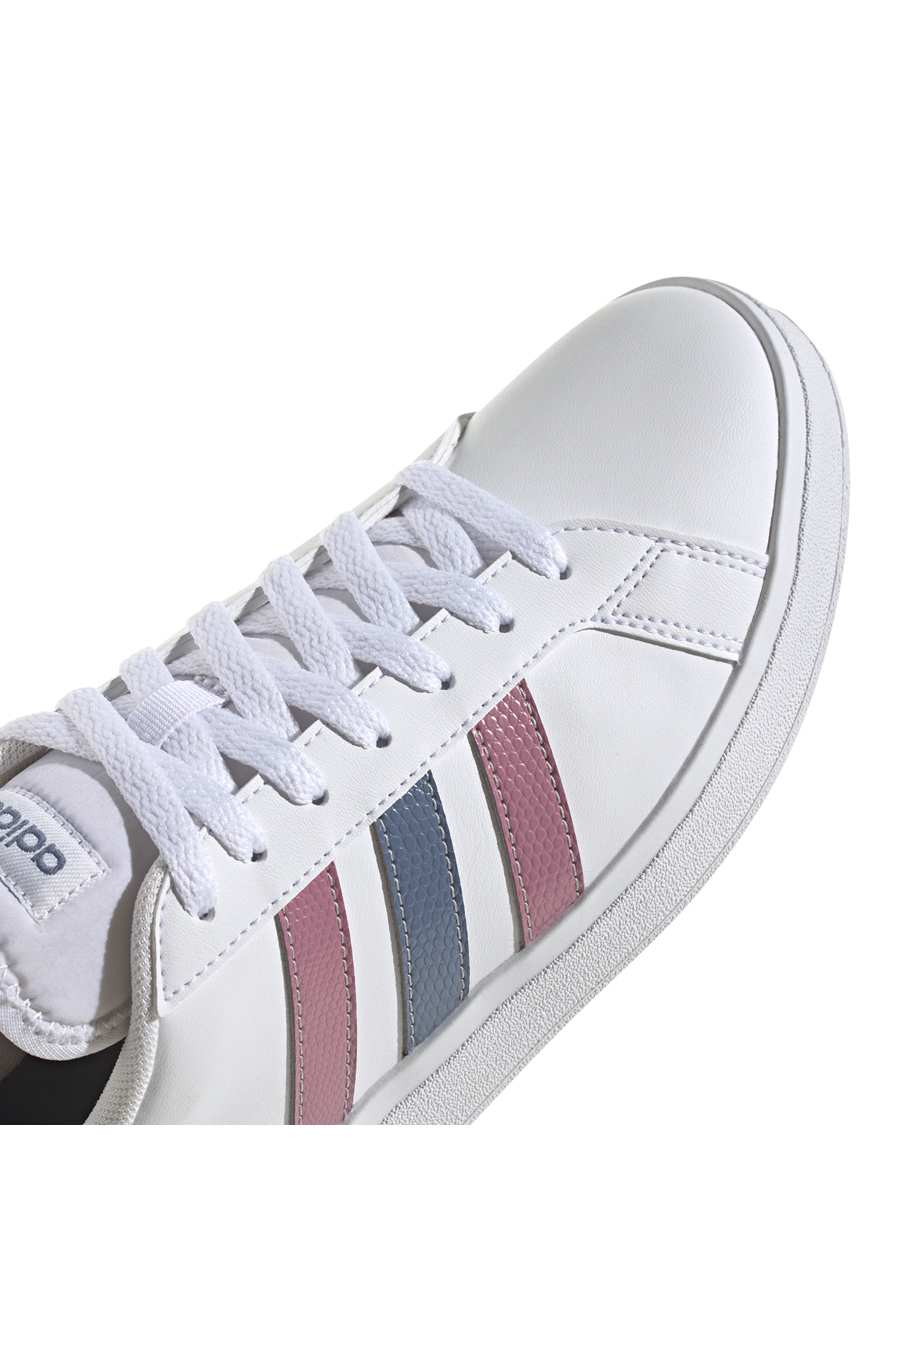 ADIDAS GRAND COURT BASE 2.0 SNEAKERS bianco per donna